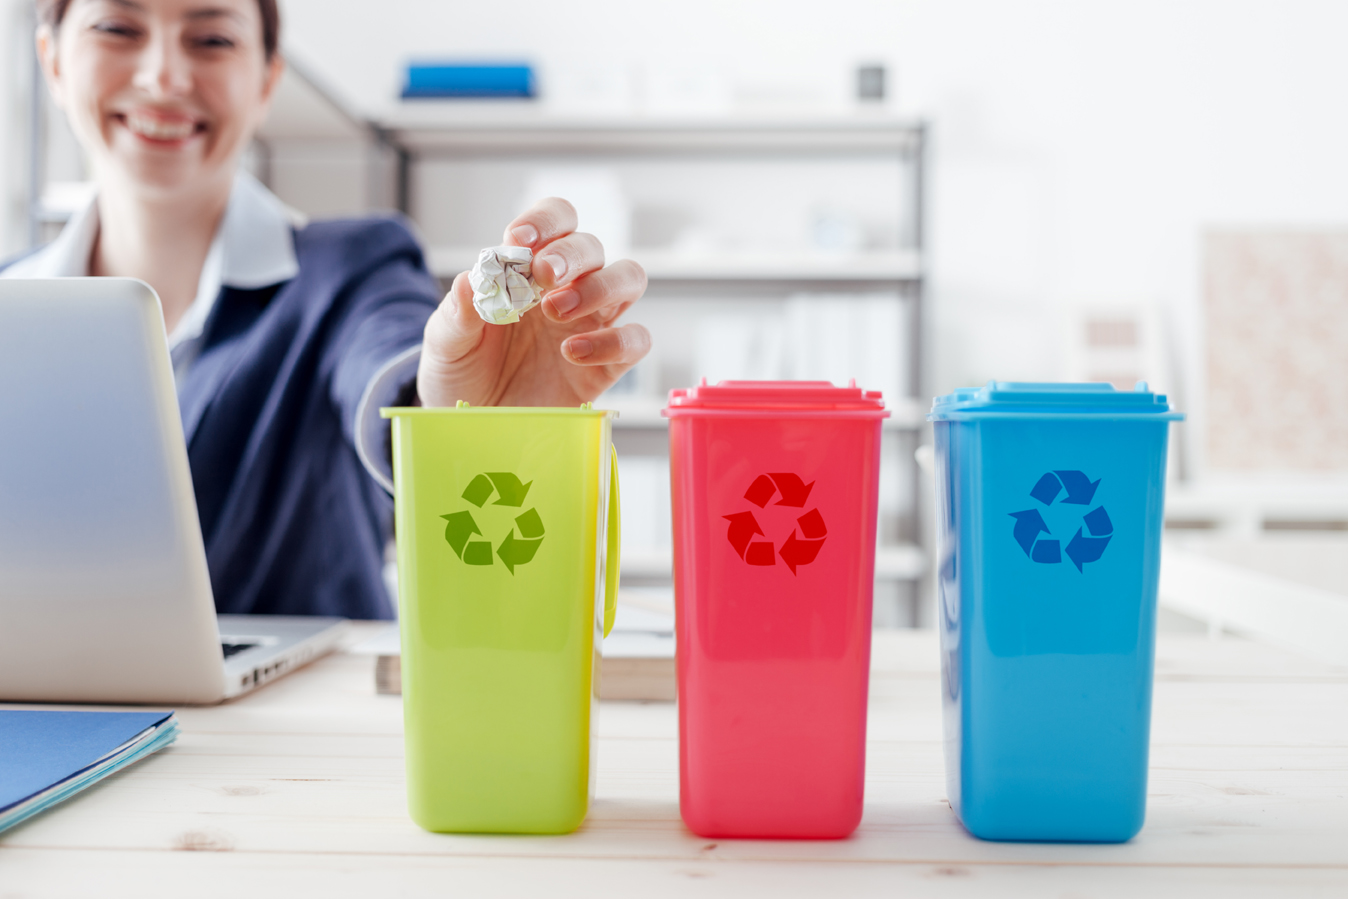 Waste separate collection and recycling in the workplace